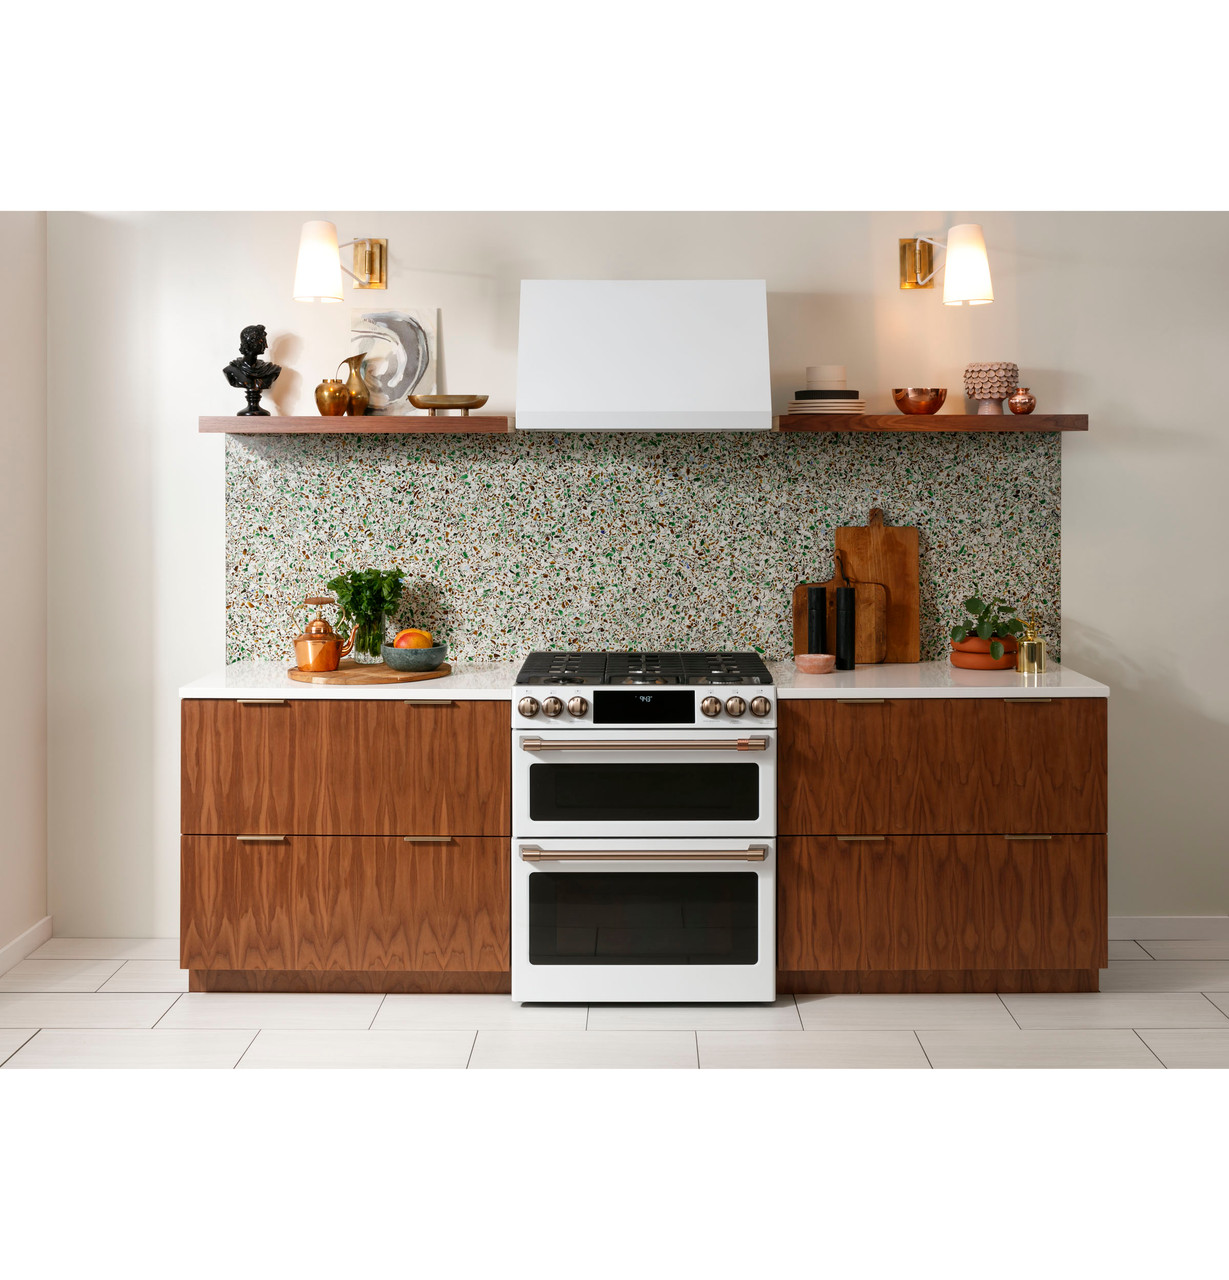 Café™ 30 Smart Slide-In, Front-Control, Gas Double-Oven Range with  Convection - CGS750P4MW2 - Cafe Appliances